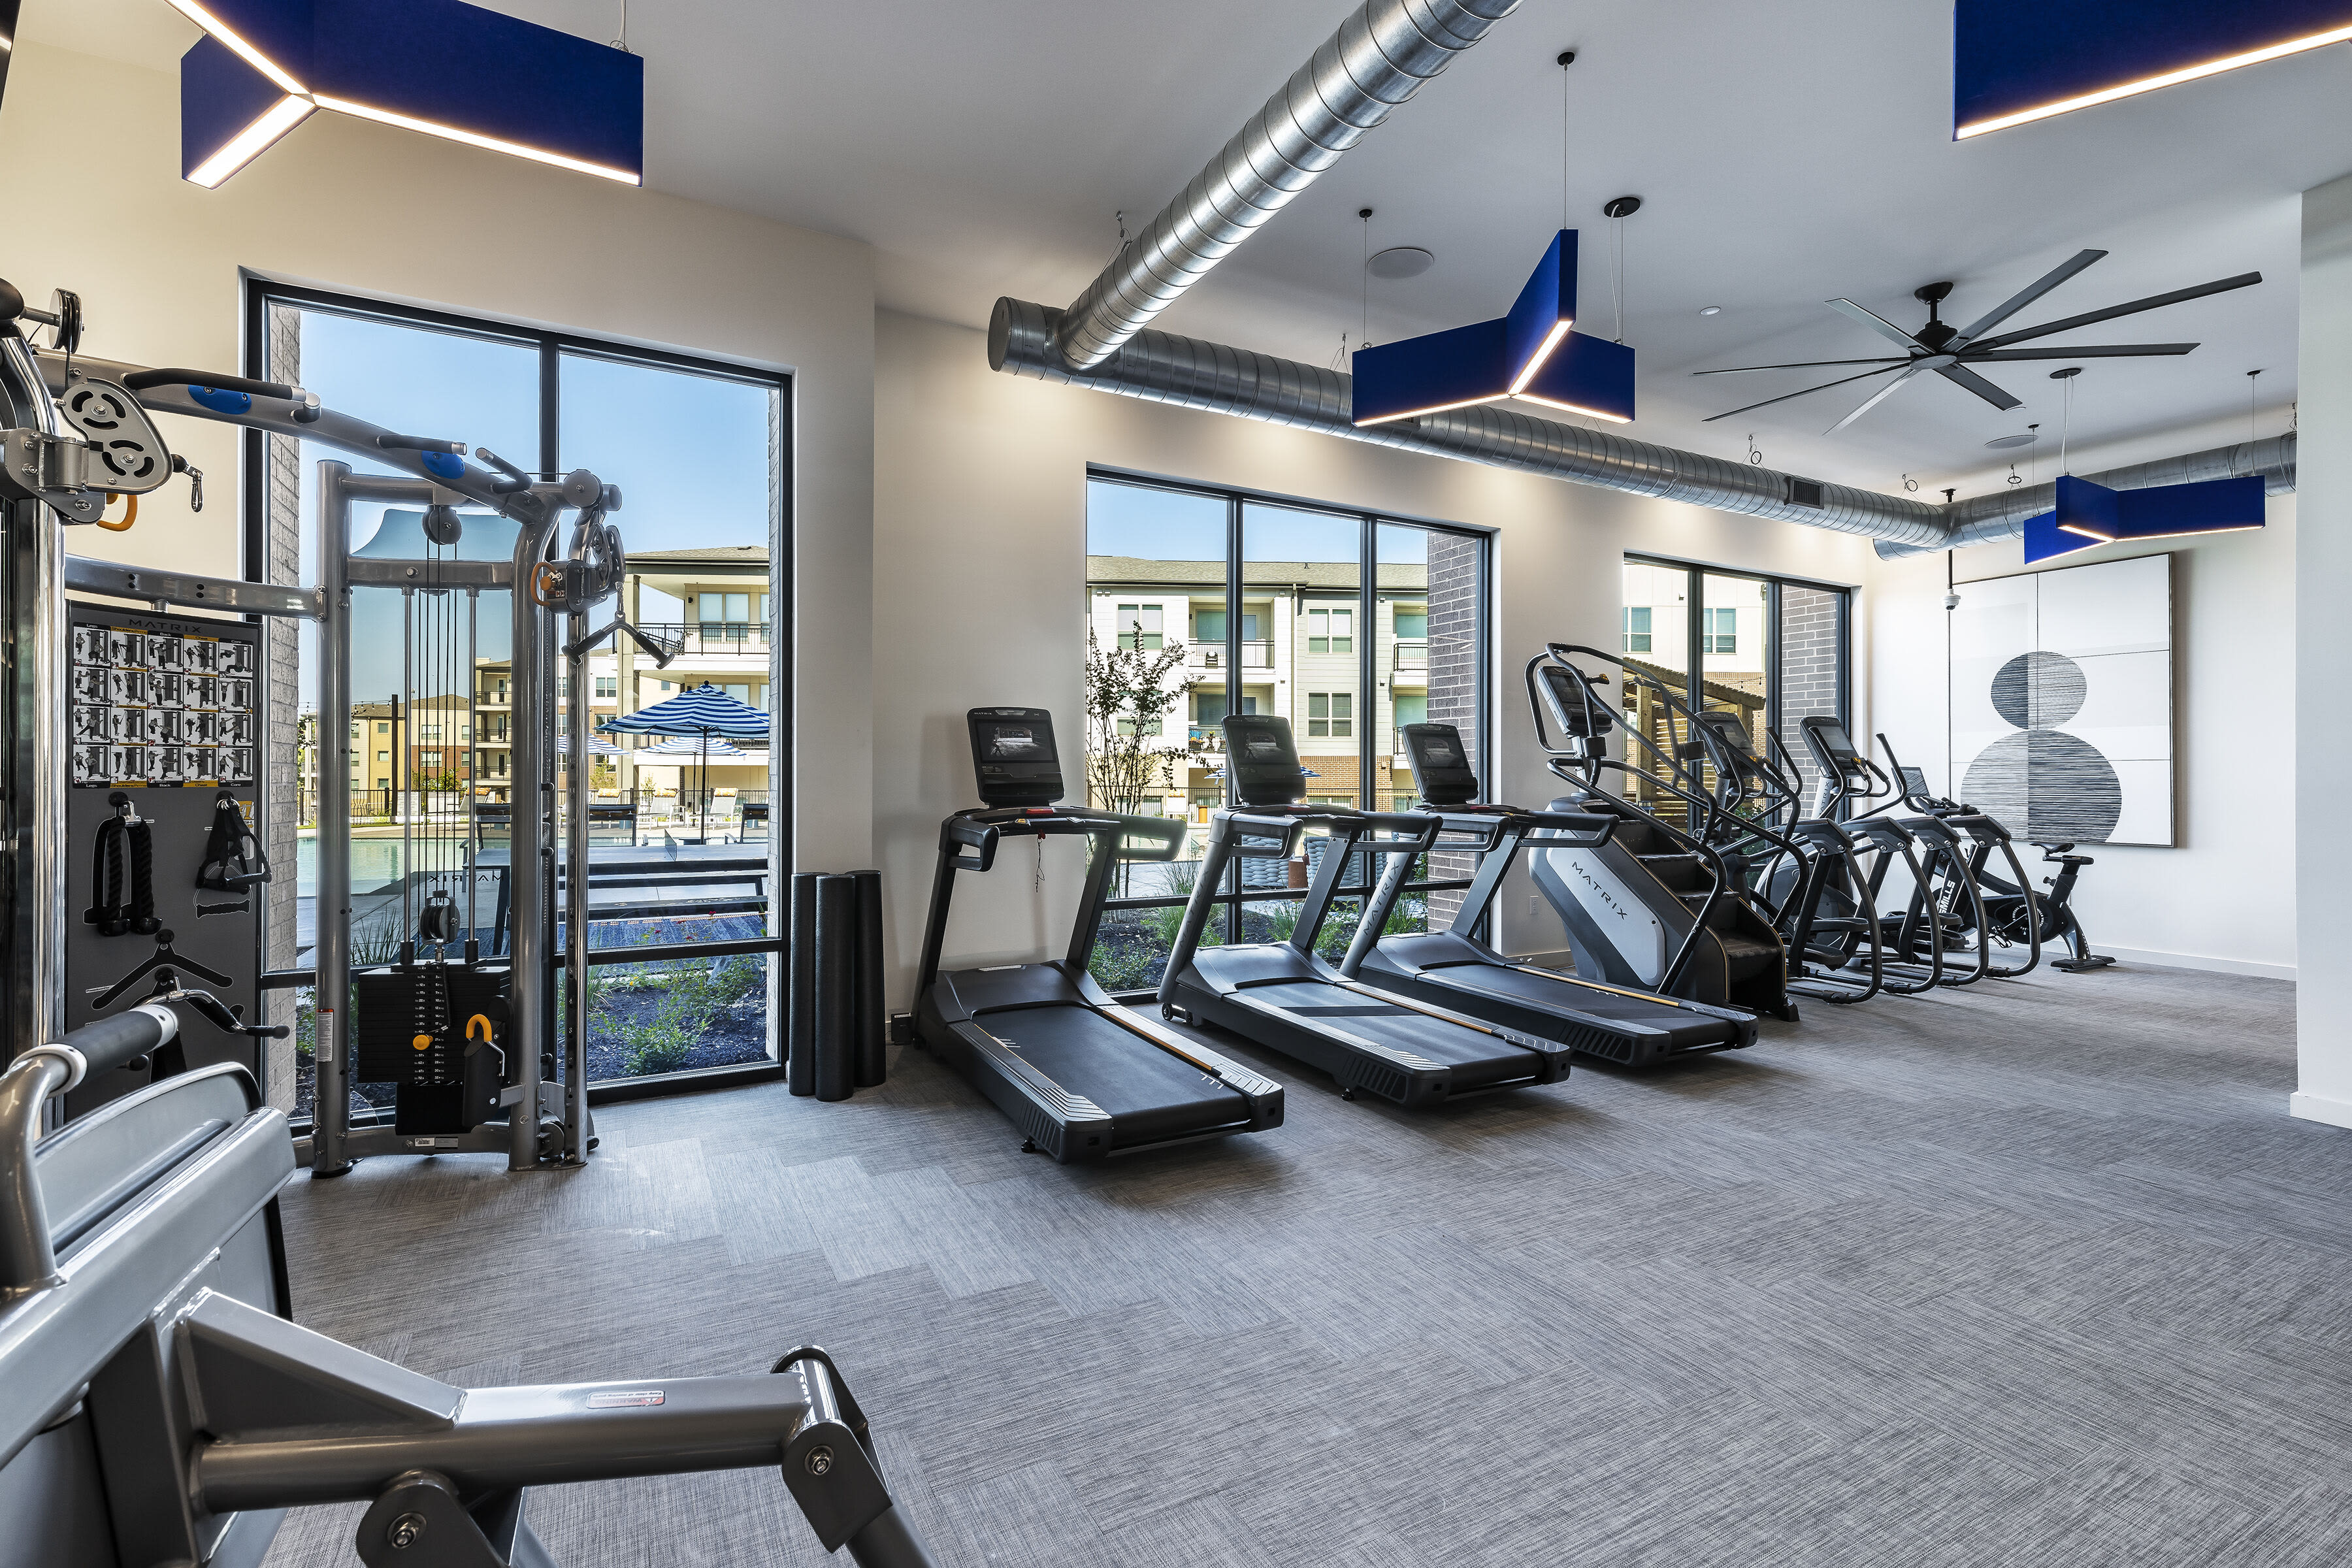 Fitness facility with cardio workout equipment at The Warner in Round Rock, Texas